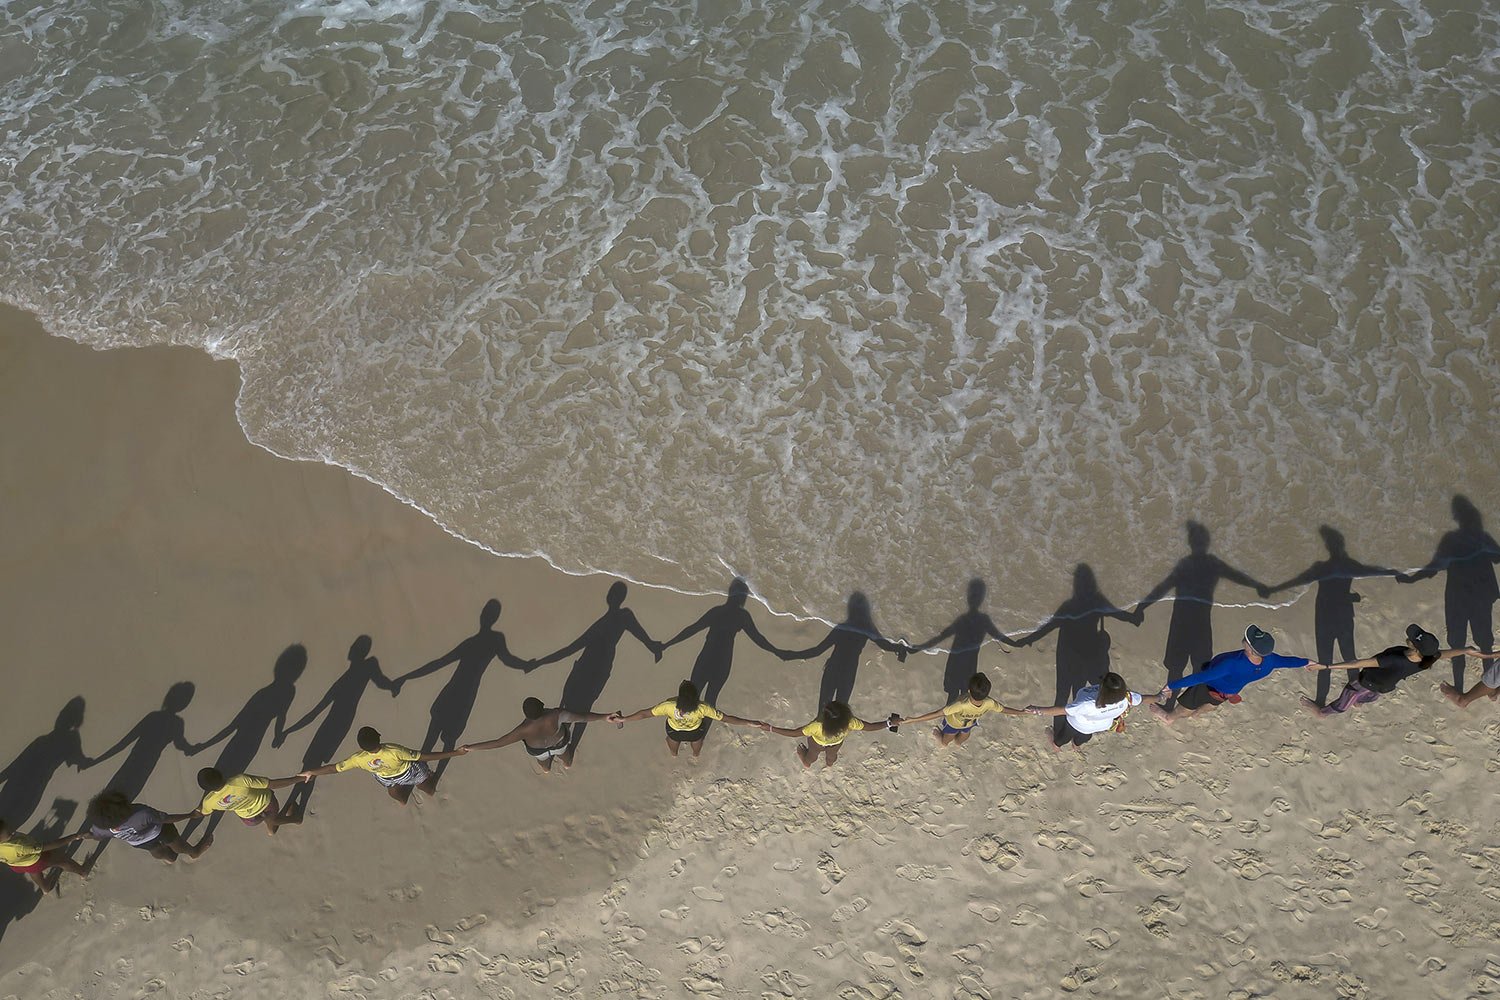  People create a line holding hands along Sao Conrado beach for a symbolic group hug with the sea, an event coined "That Hug" to draw attention to ocean pollution on World Oceans Day in Rio de Janeiro, Brazil, June 8, 2023. (AP Photo/Bruna Prado) 